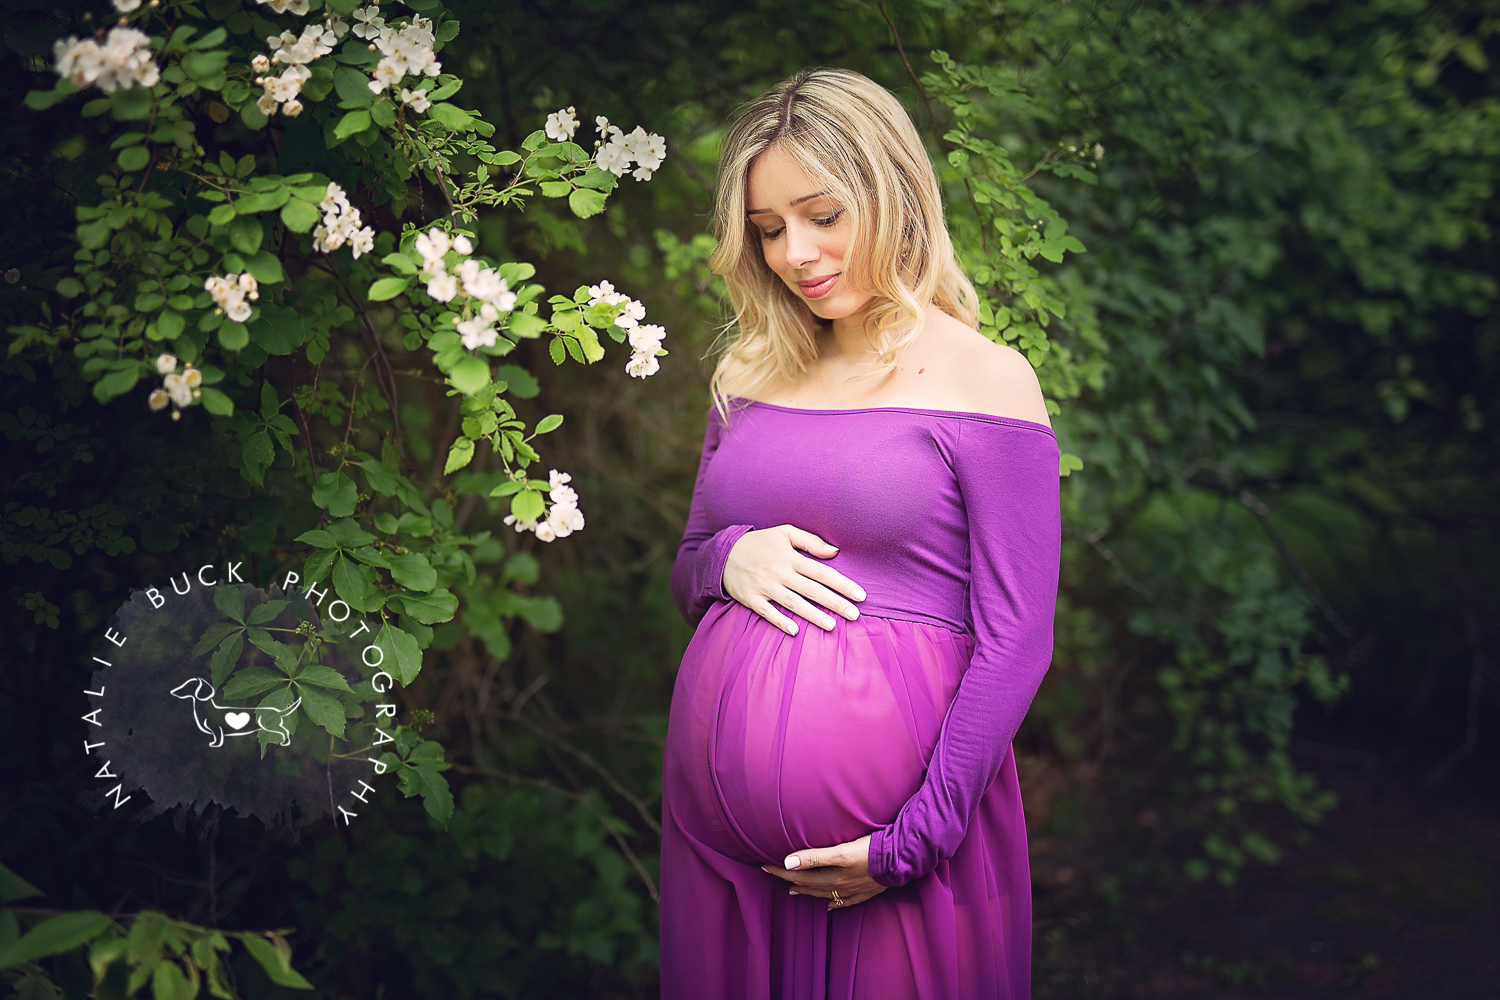 Connecticut Maternity Session - Natalie Buck Photography